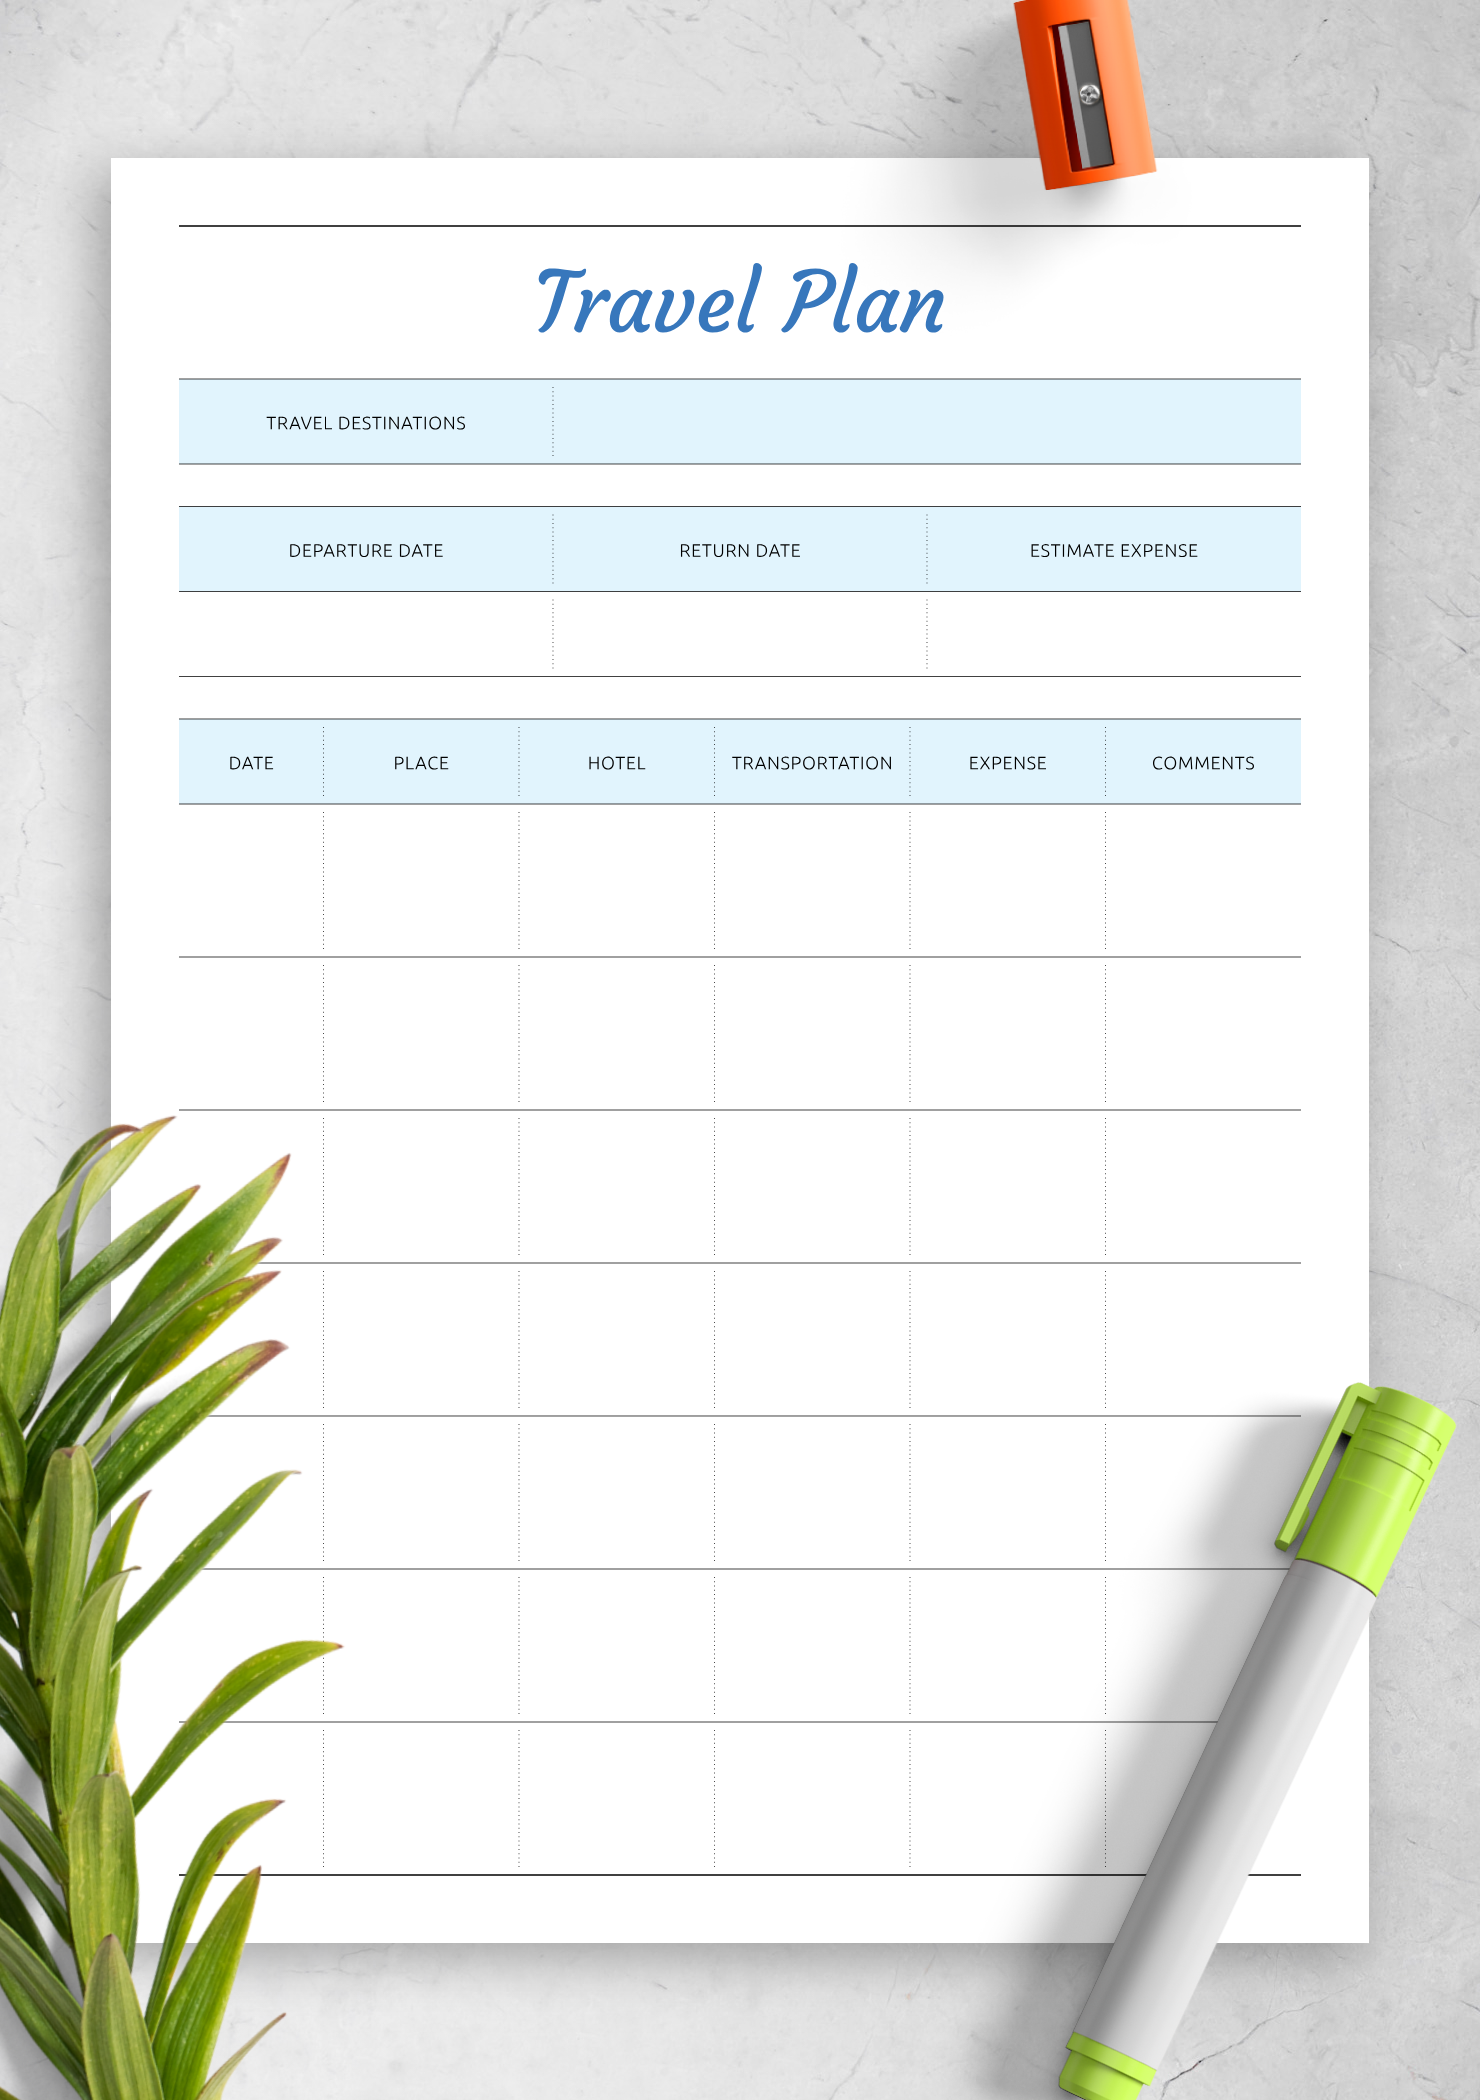 Download Printable Travel Plan Template PDF Inside Travel Planner Itinerary Template Pertaining To Travel Planner Itinerary Template